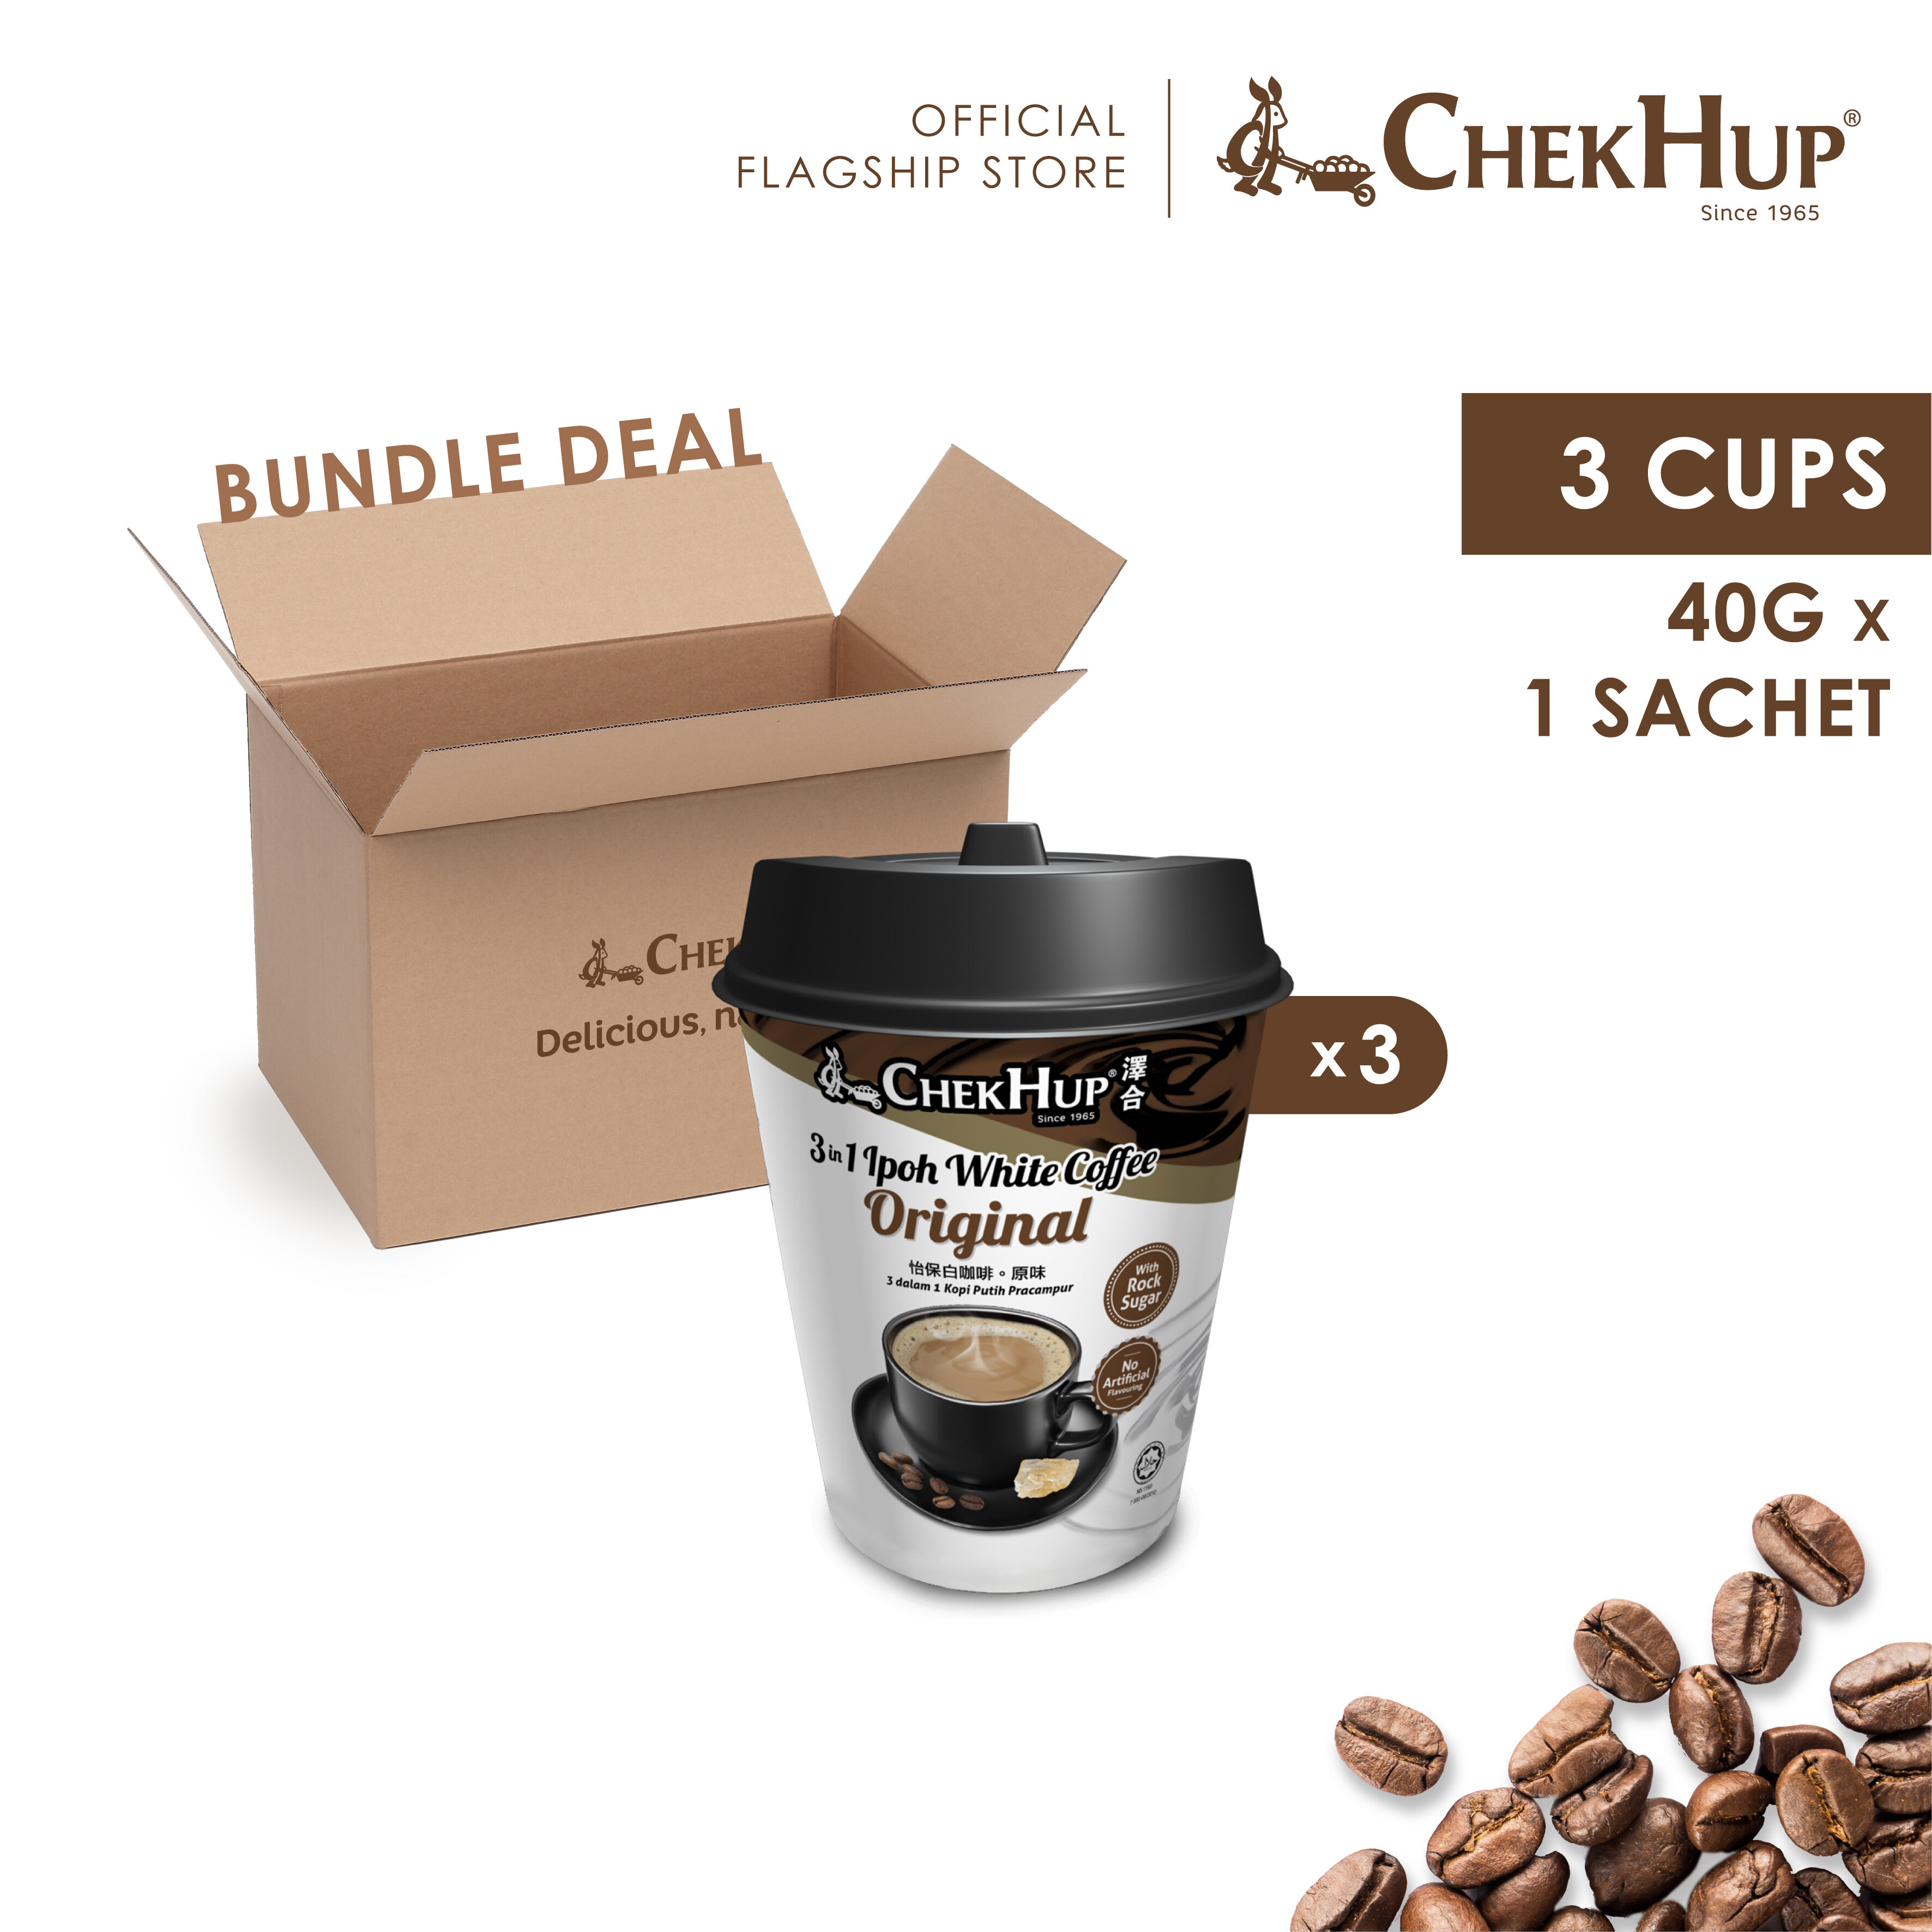 Chek Hup 3 in 1 Ipoh White Coffee Original (40g x 3 Cups)  [Bundle of 3]